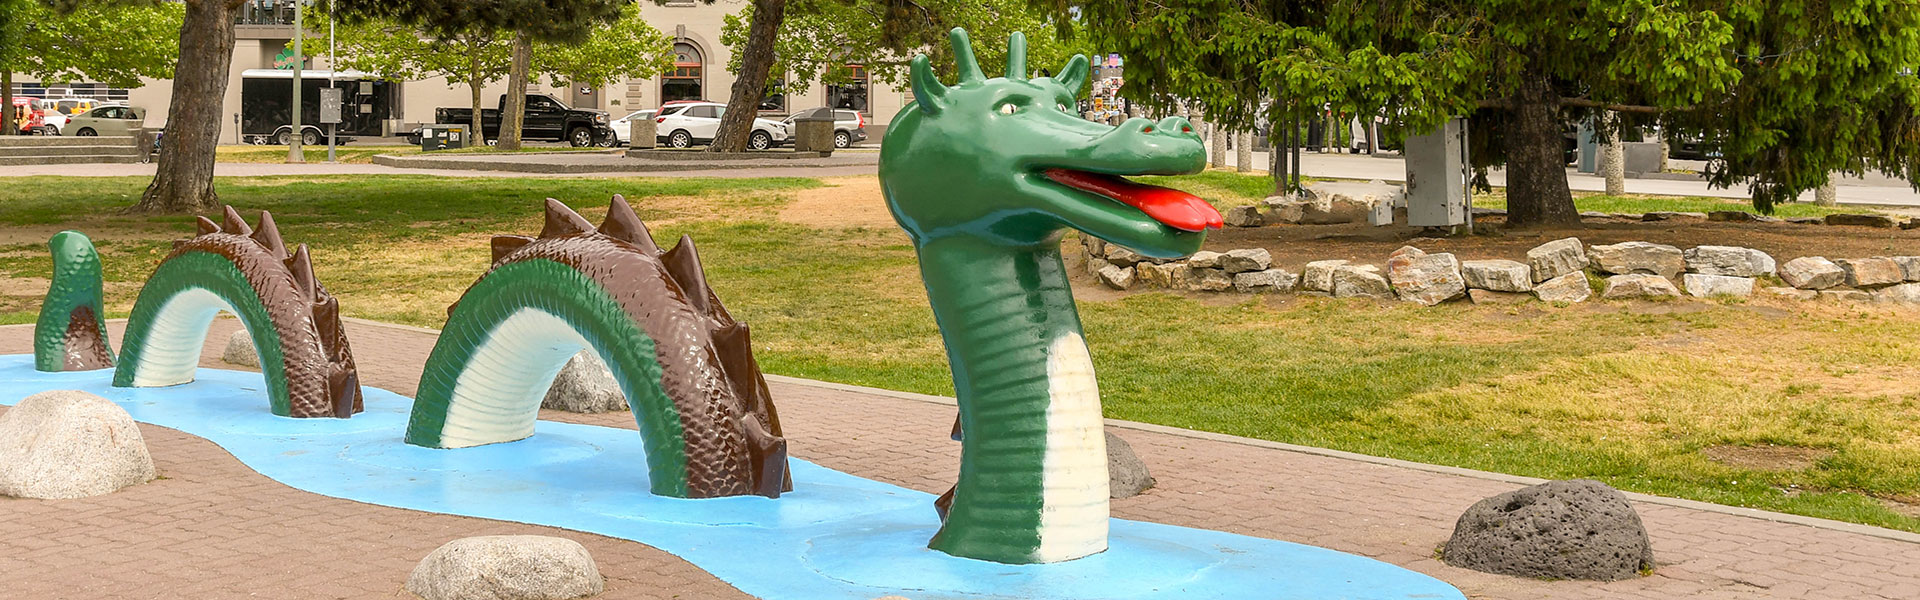 N'ha-a-itk, also known by the anglicized name of Ogopogo, has been a part of Kelowna area history for many years.